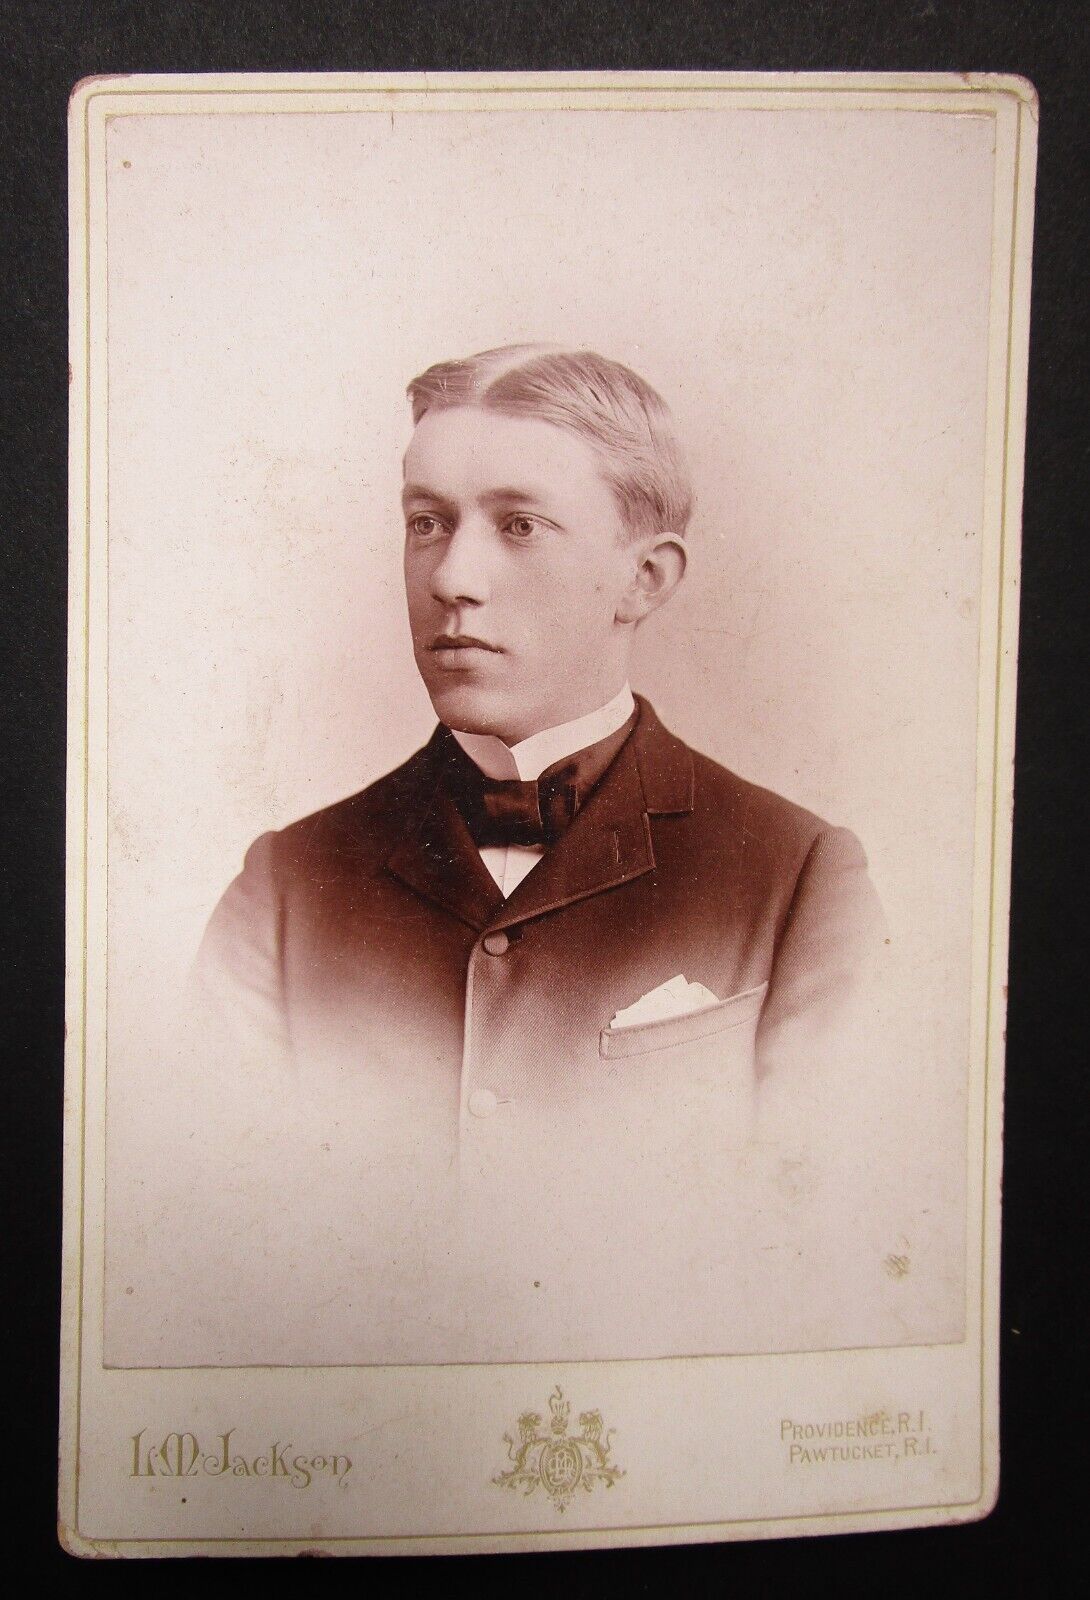 Antique Rhode Island Handsome Young Man in Suit Cabinet Photo Card 1890s